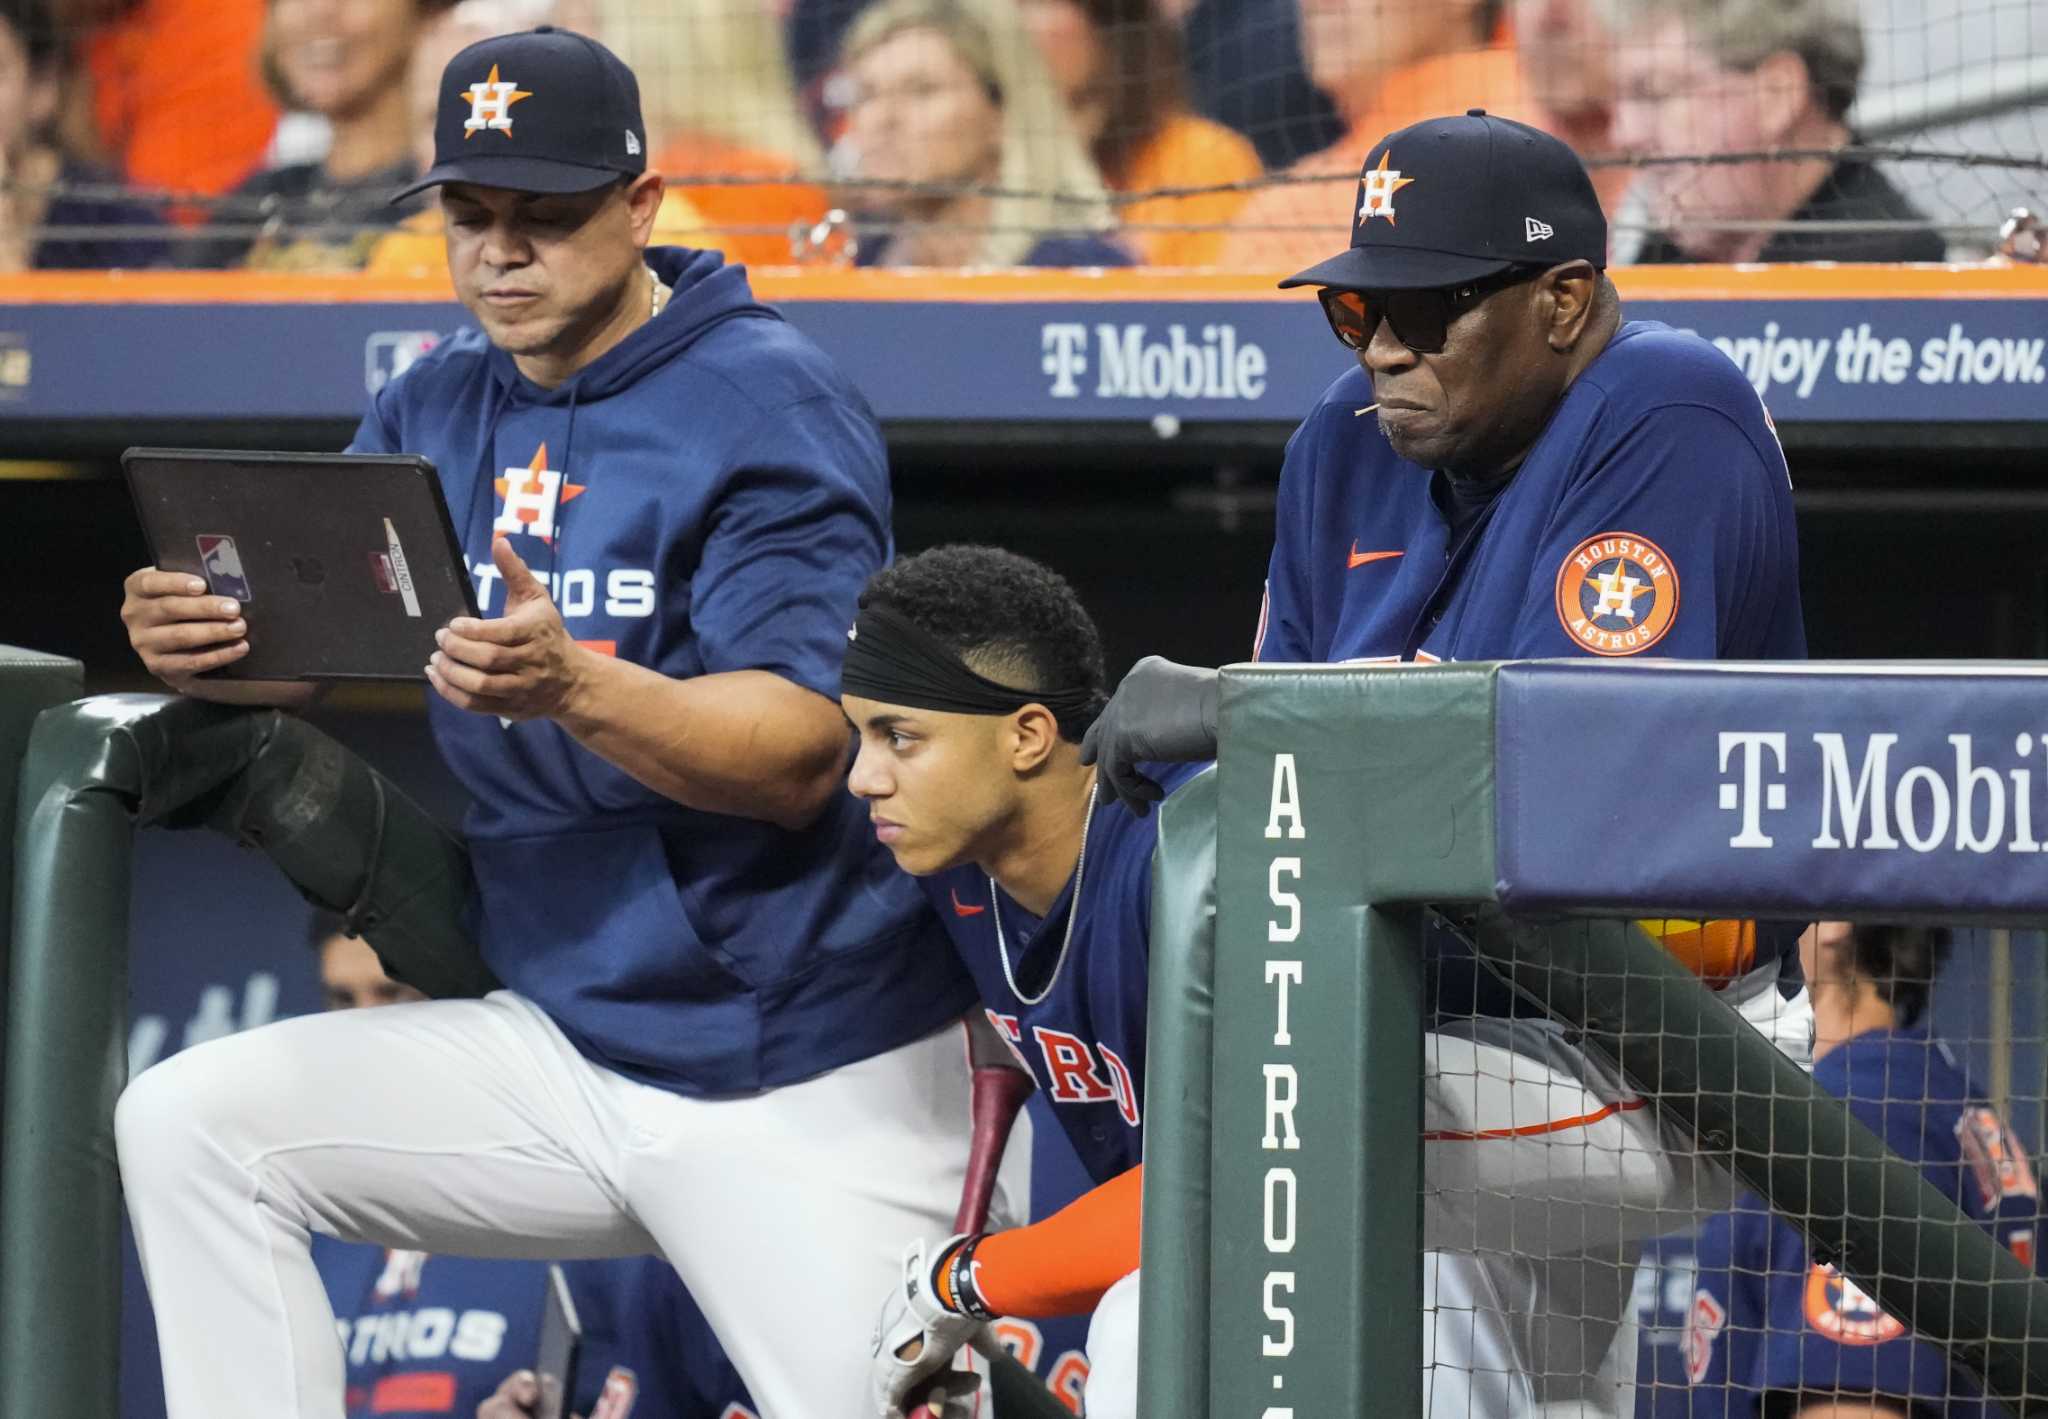 Astros: Several Former Astros Players are Now on AL West Coaching Staffs